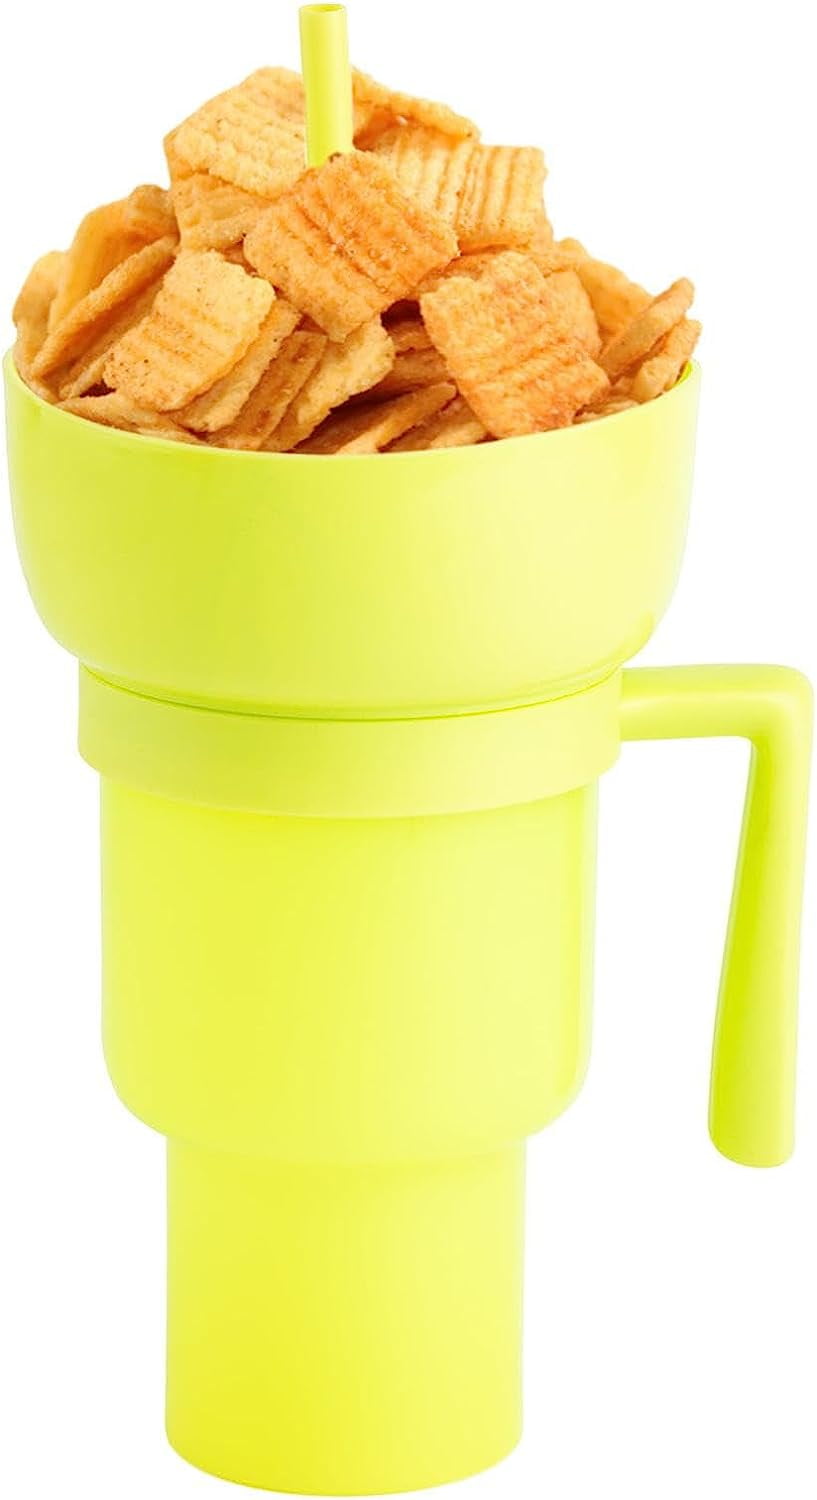 Snack Cups